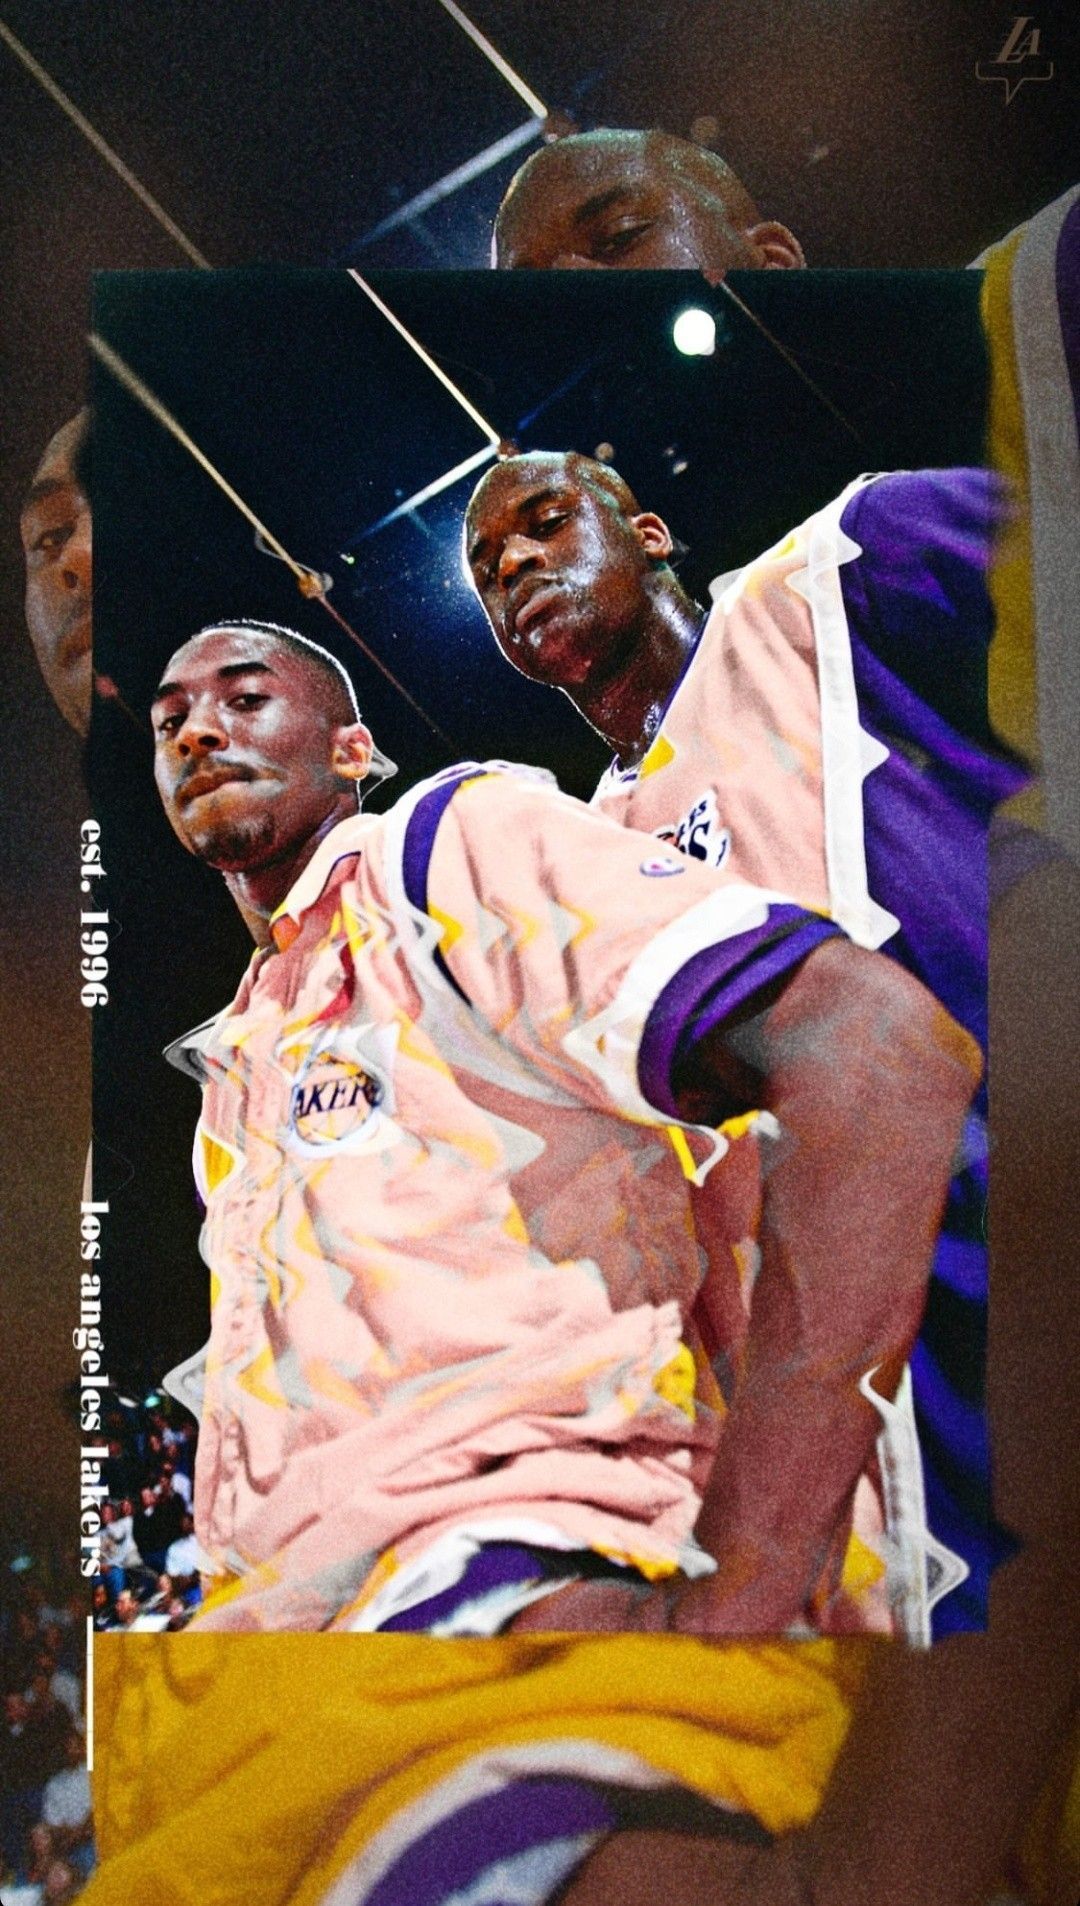 Kobe Bryant and Shaquille O'Neal wallpaper. Nba background, Lakers wallpaper, Lakers kobe bryant